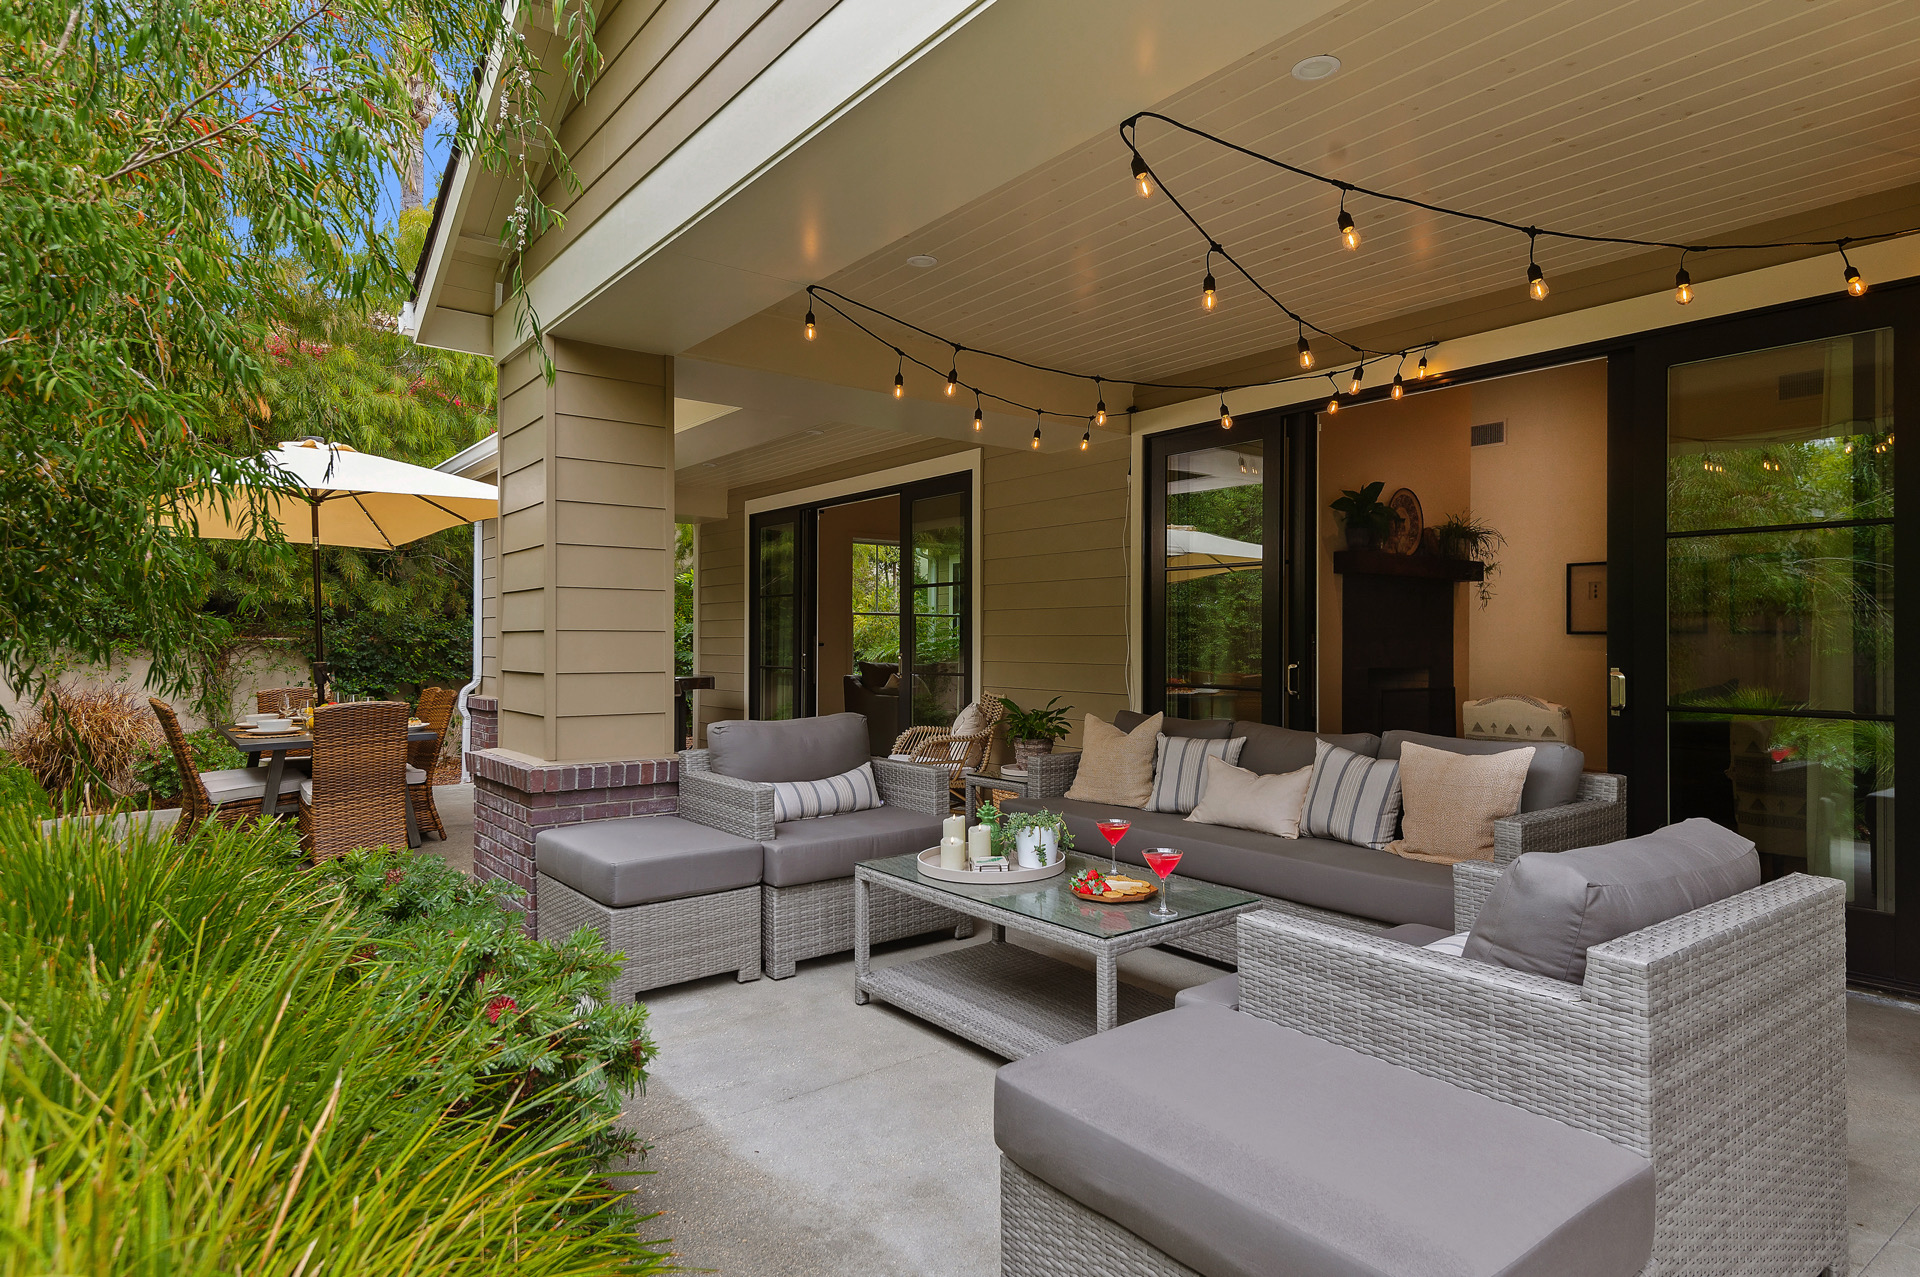 Outdoor space with lovely, comfortable couches and string lights.